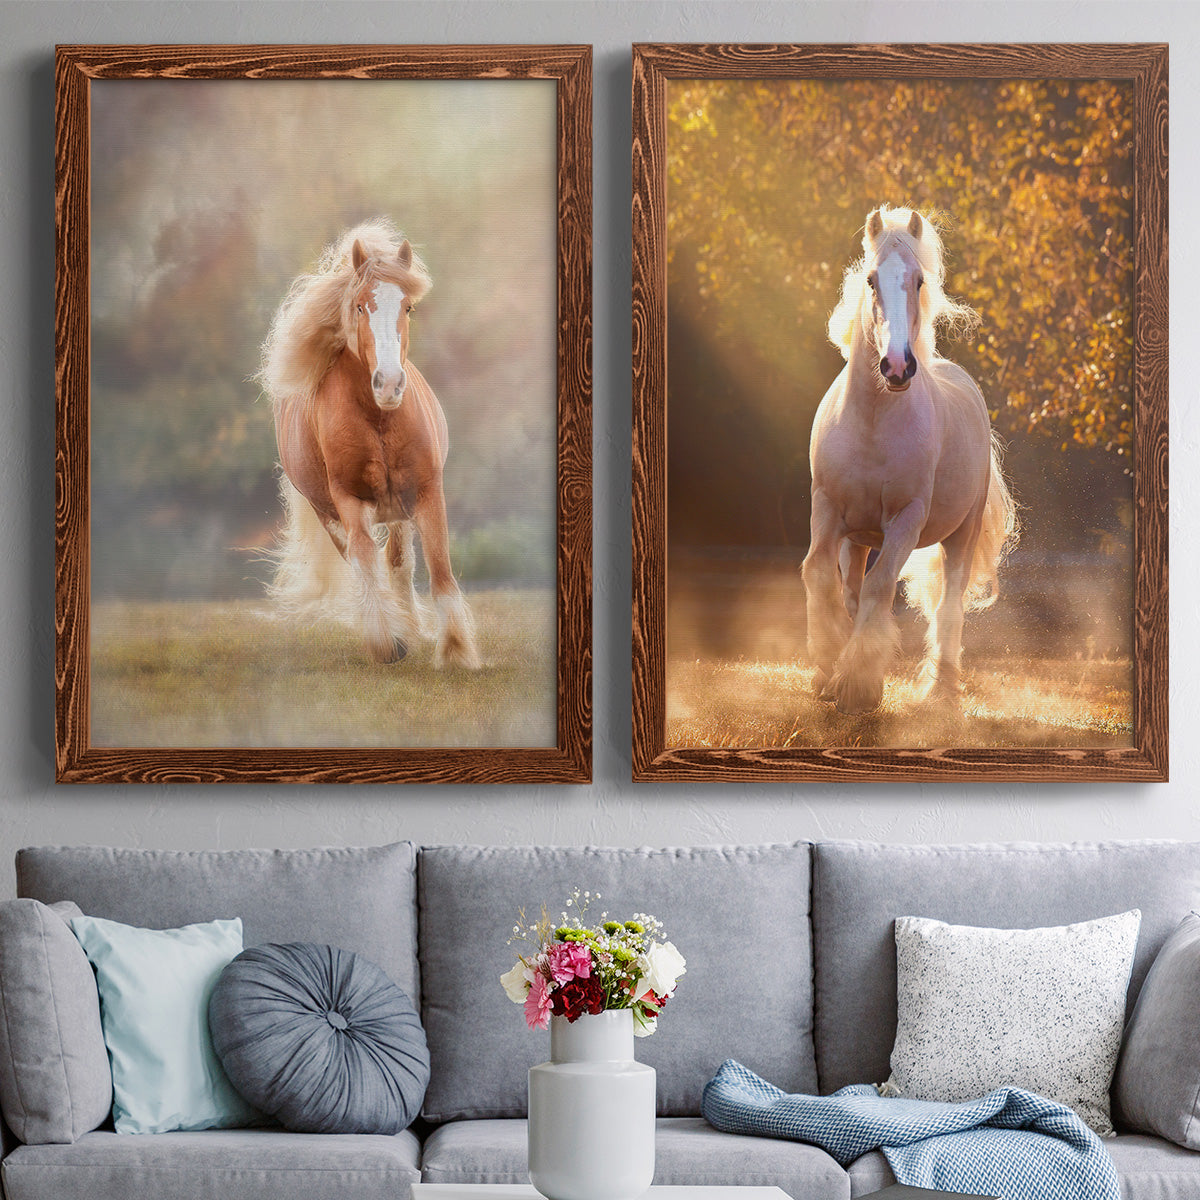 Horse Motion VII - Premium Framed Canvas 2 Piece Set - Ready to Hang